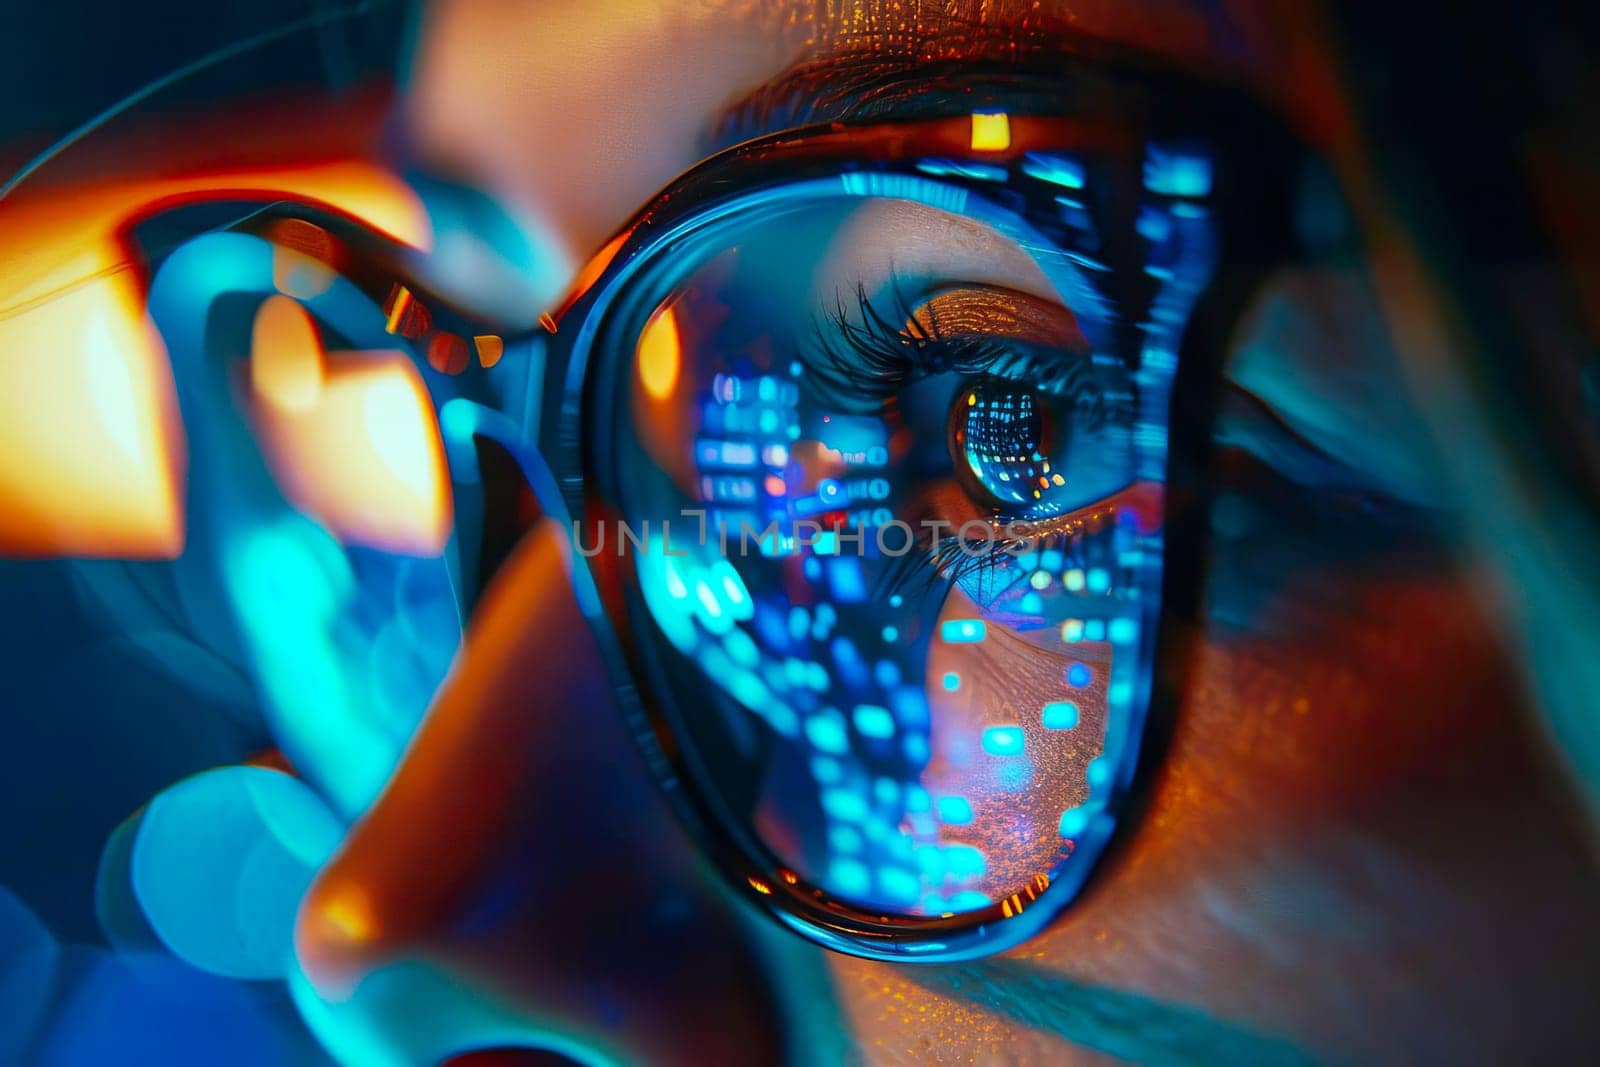 A close-up view of a persons eye framed by a pair of glasses and monitor reflected in the lenses